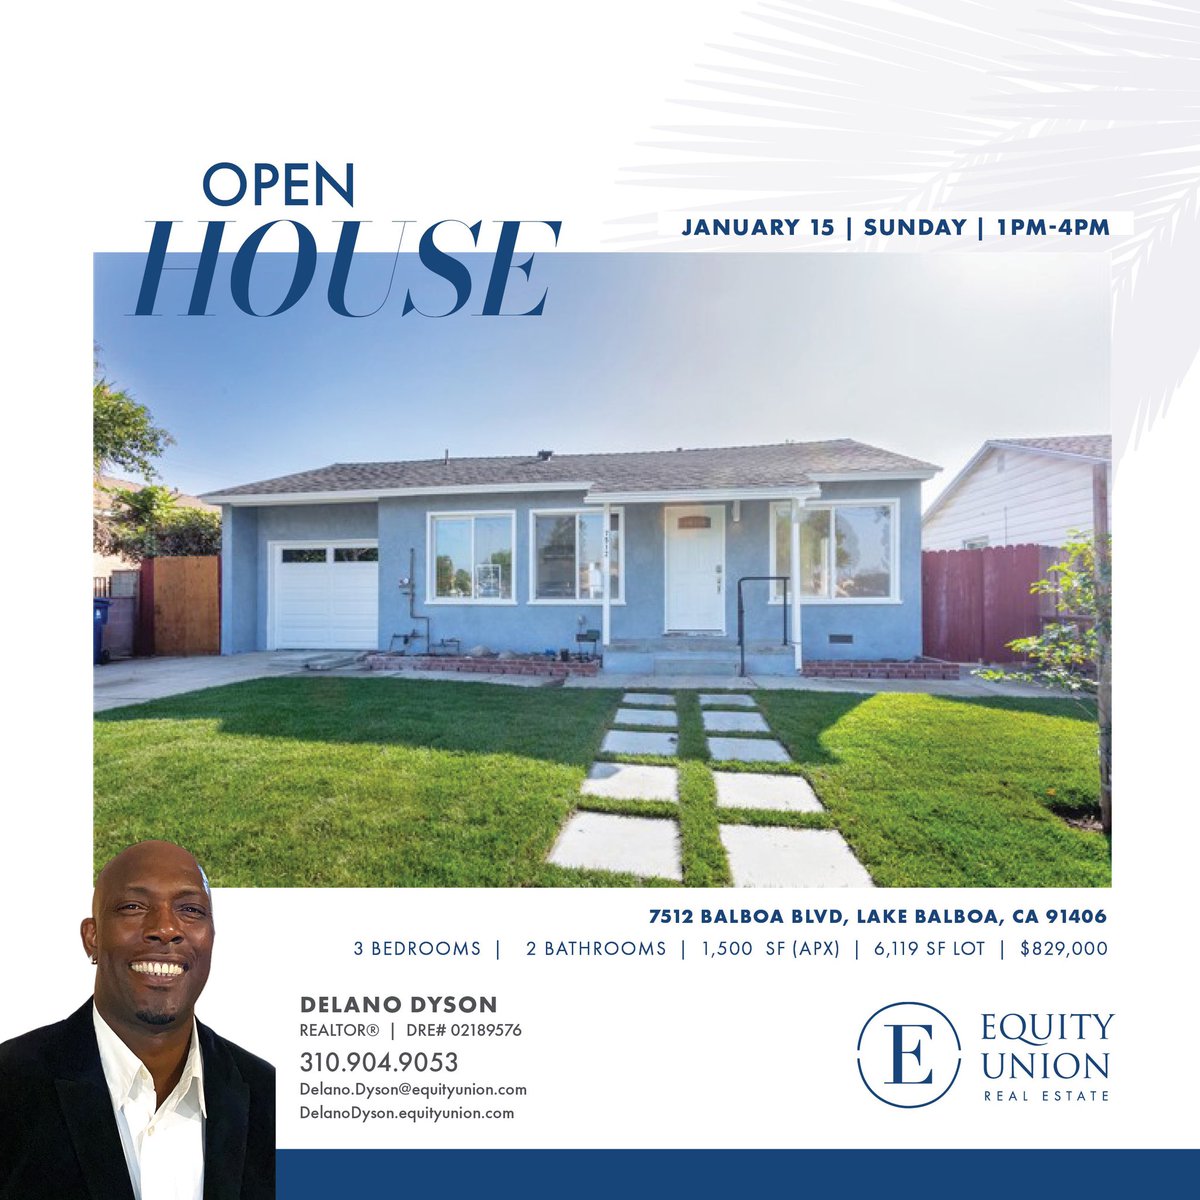 Open House…. #homebuying #getpreapproved #expertanswers #stayinformed #staycurrent #powerfuldecision #confidentdecisions #realestate #realestatetips #realestatelife #realestateagent #realestateexpert #realestatetipsoftheday #realestatetipsandadvice #palmagent